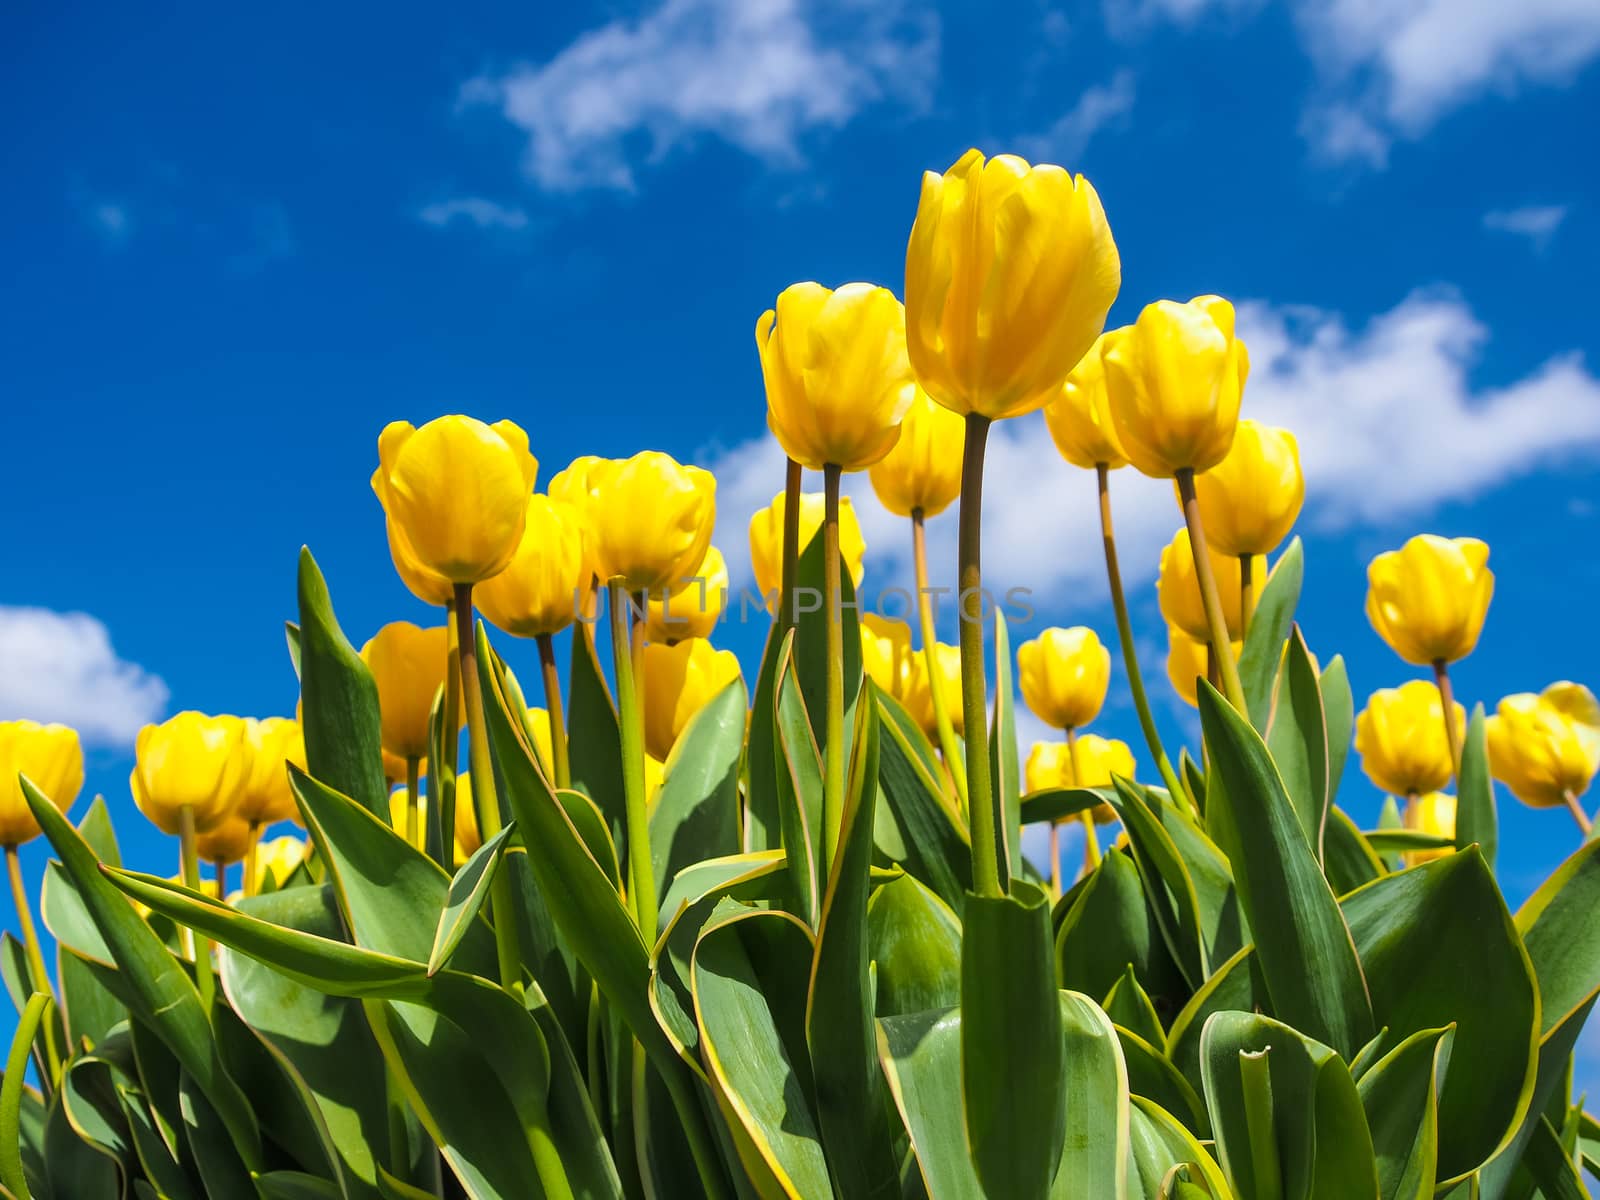 Yellow tulips over a blue sky  by simpleBE